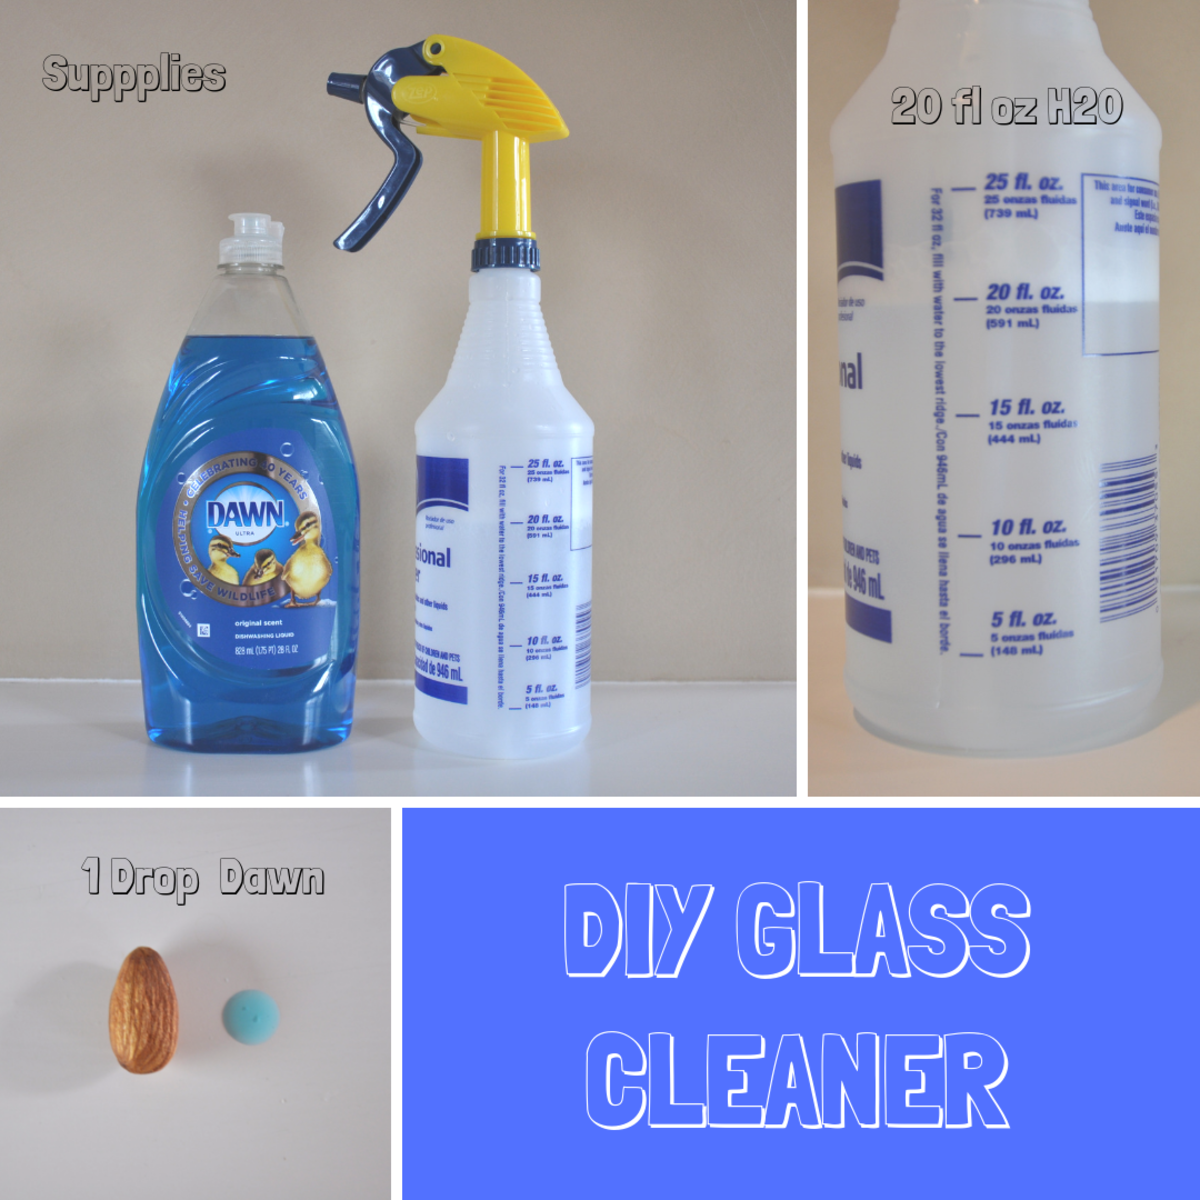 You can make a simple glass cleaner by added 1 drop of Dawn soap to 20 oz of water.